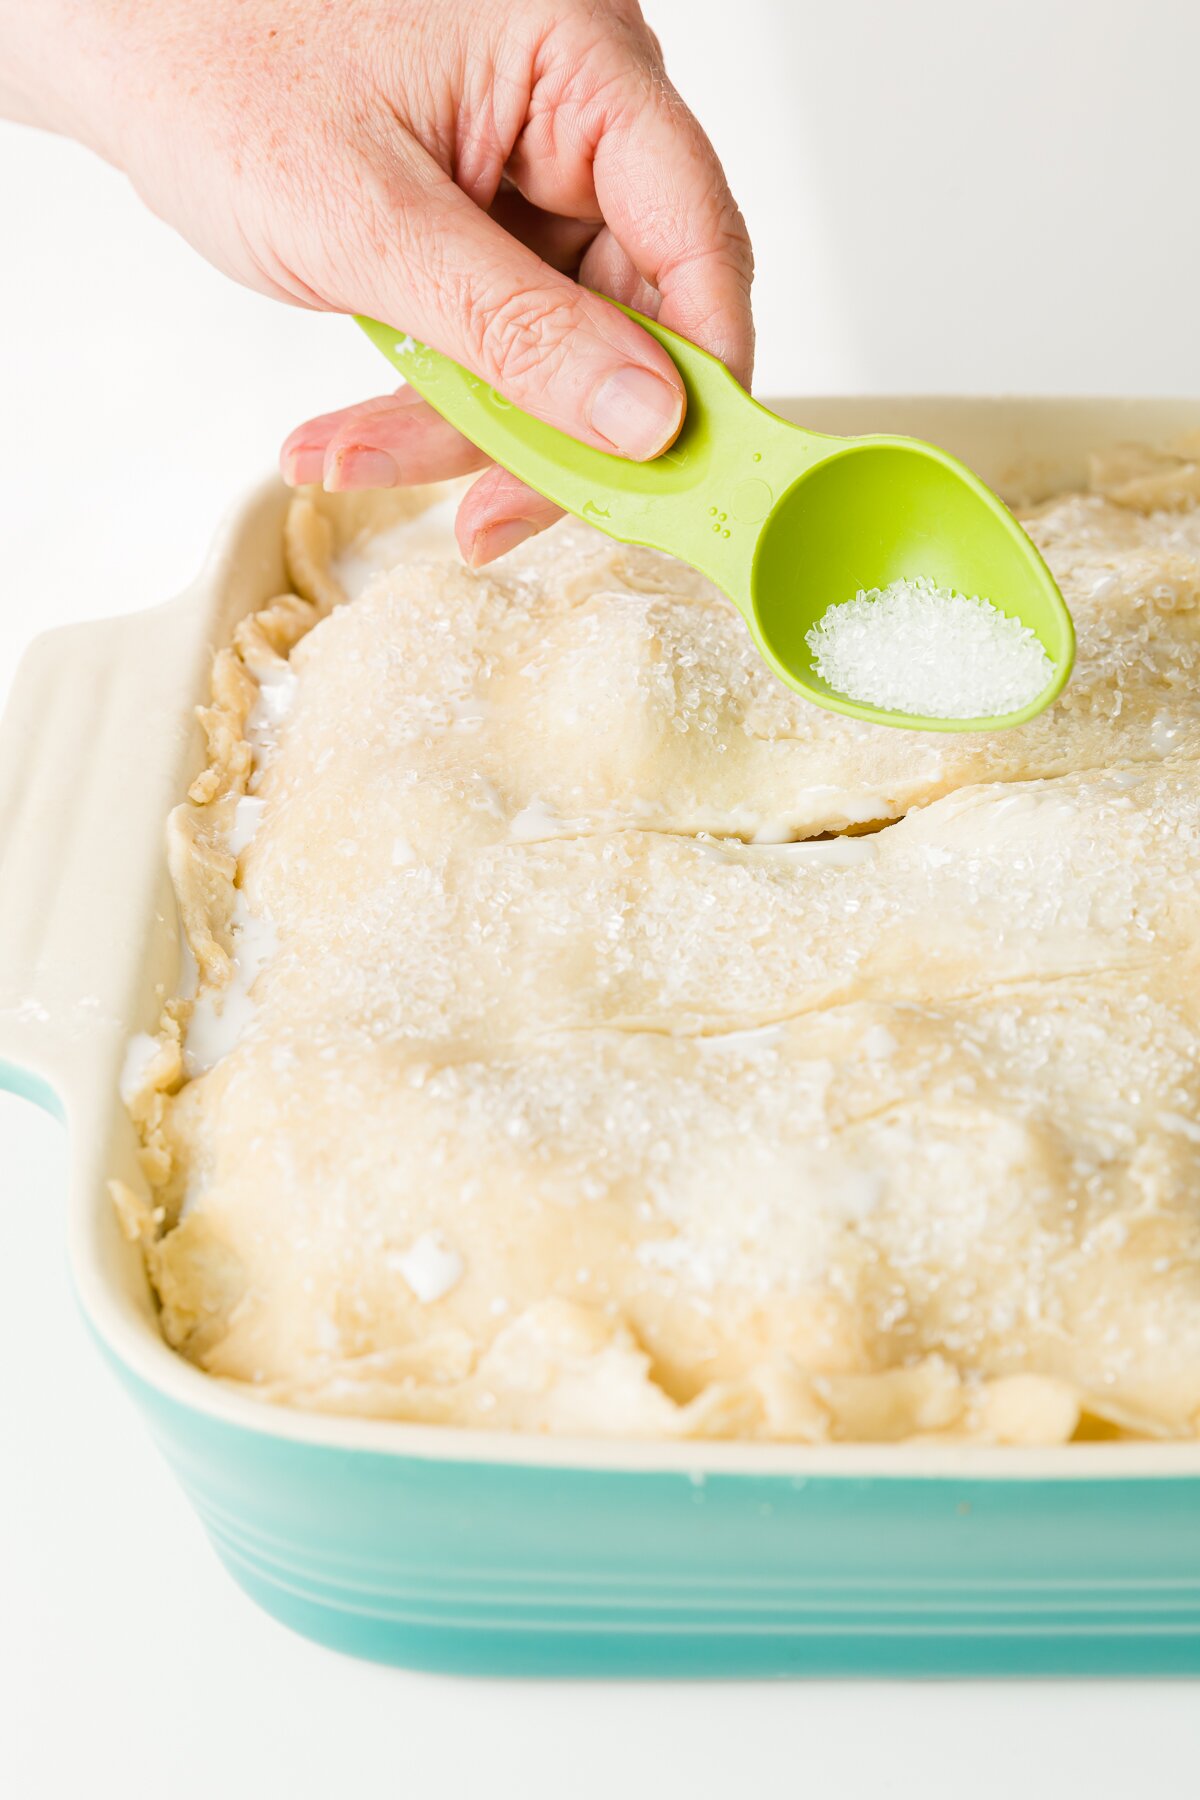 Adding sparkly sugar onto pie crust from a green tablespoon